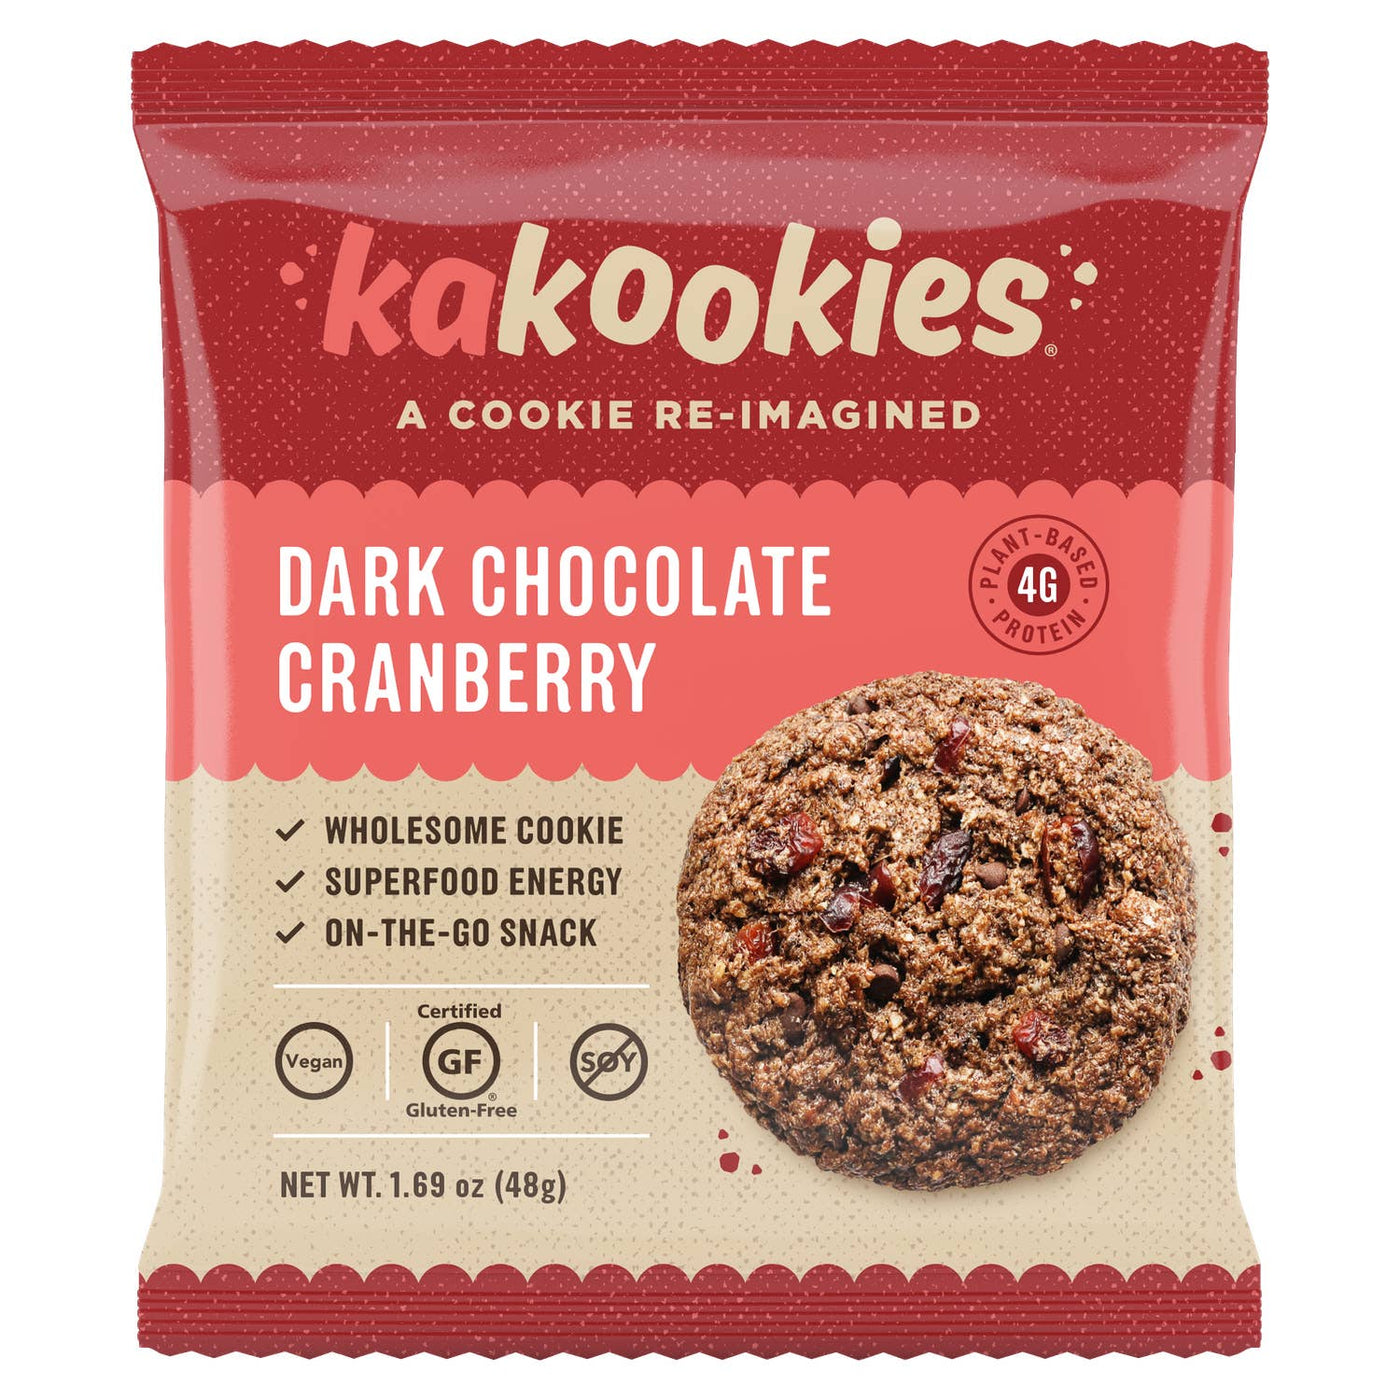 Dark Chocolate Cranberry Cookie - The Lake and Company